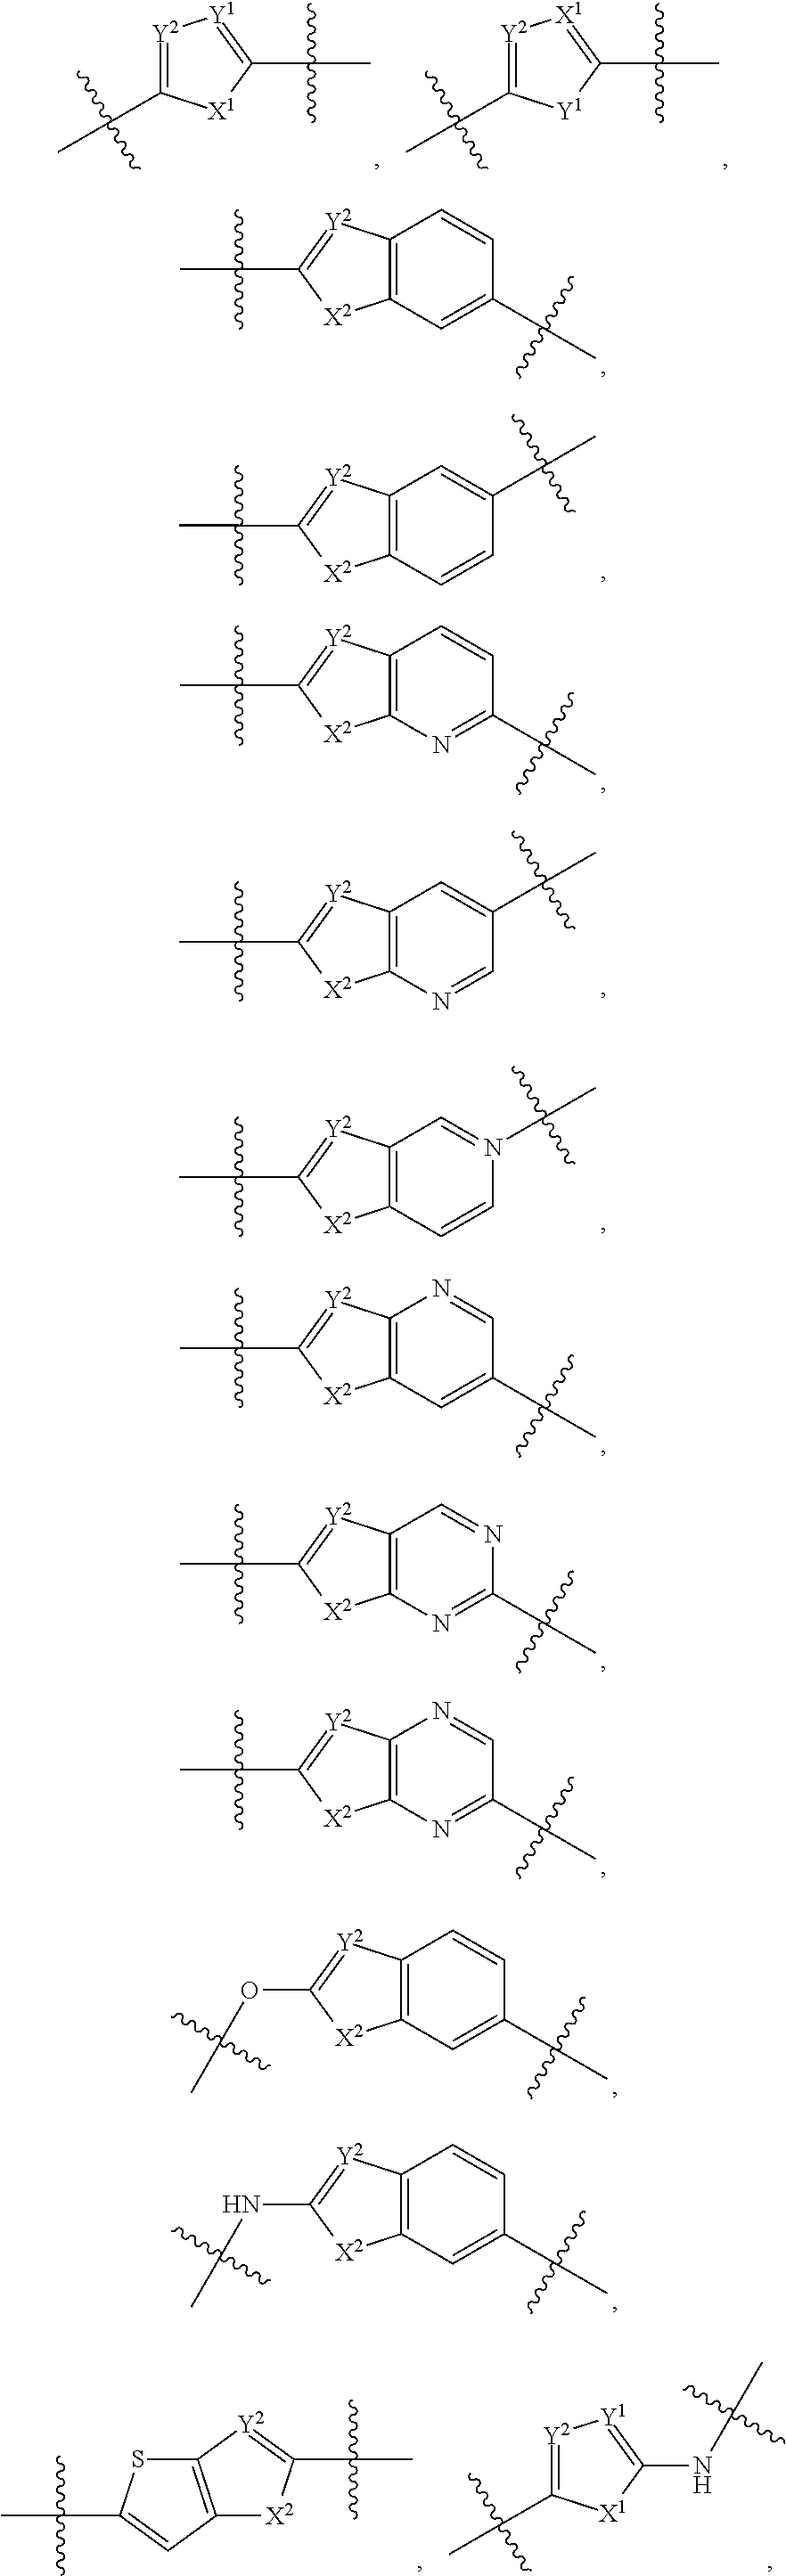 Bridged Ring compounds As Hepatitis C Virus (HCV) Inhibitors And Pharmaceutical Applications Thereof